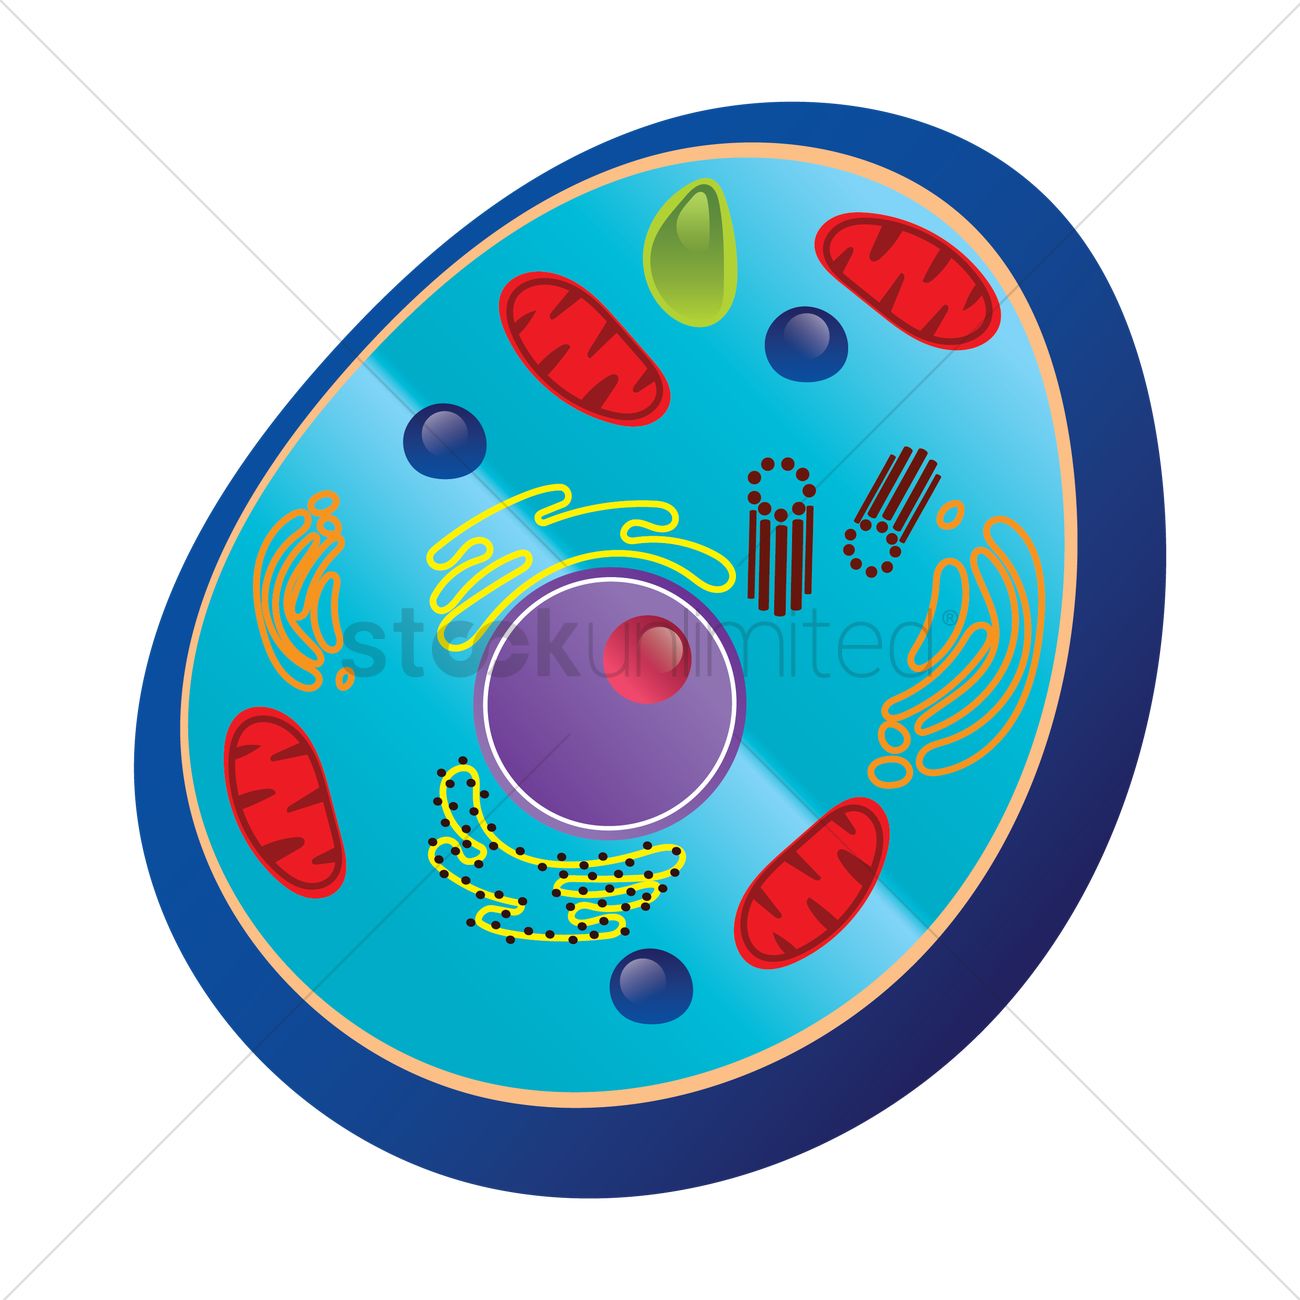 Animal cell clipart 5 » Clipart Station.